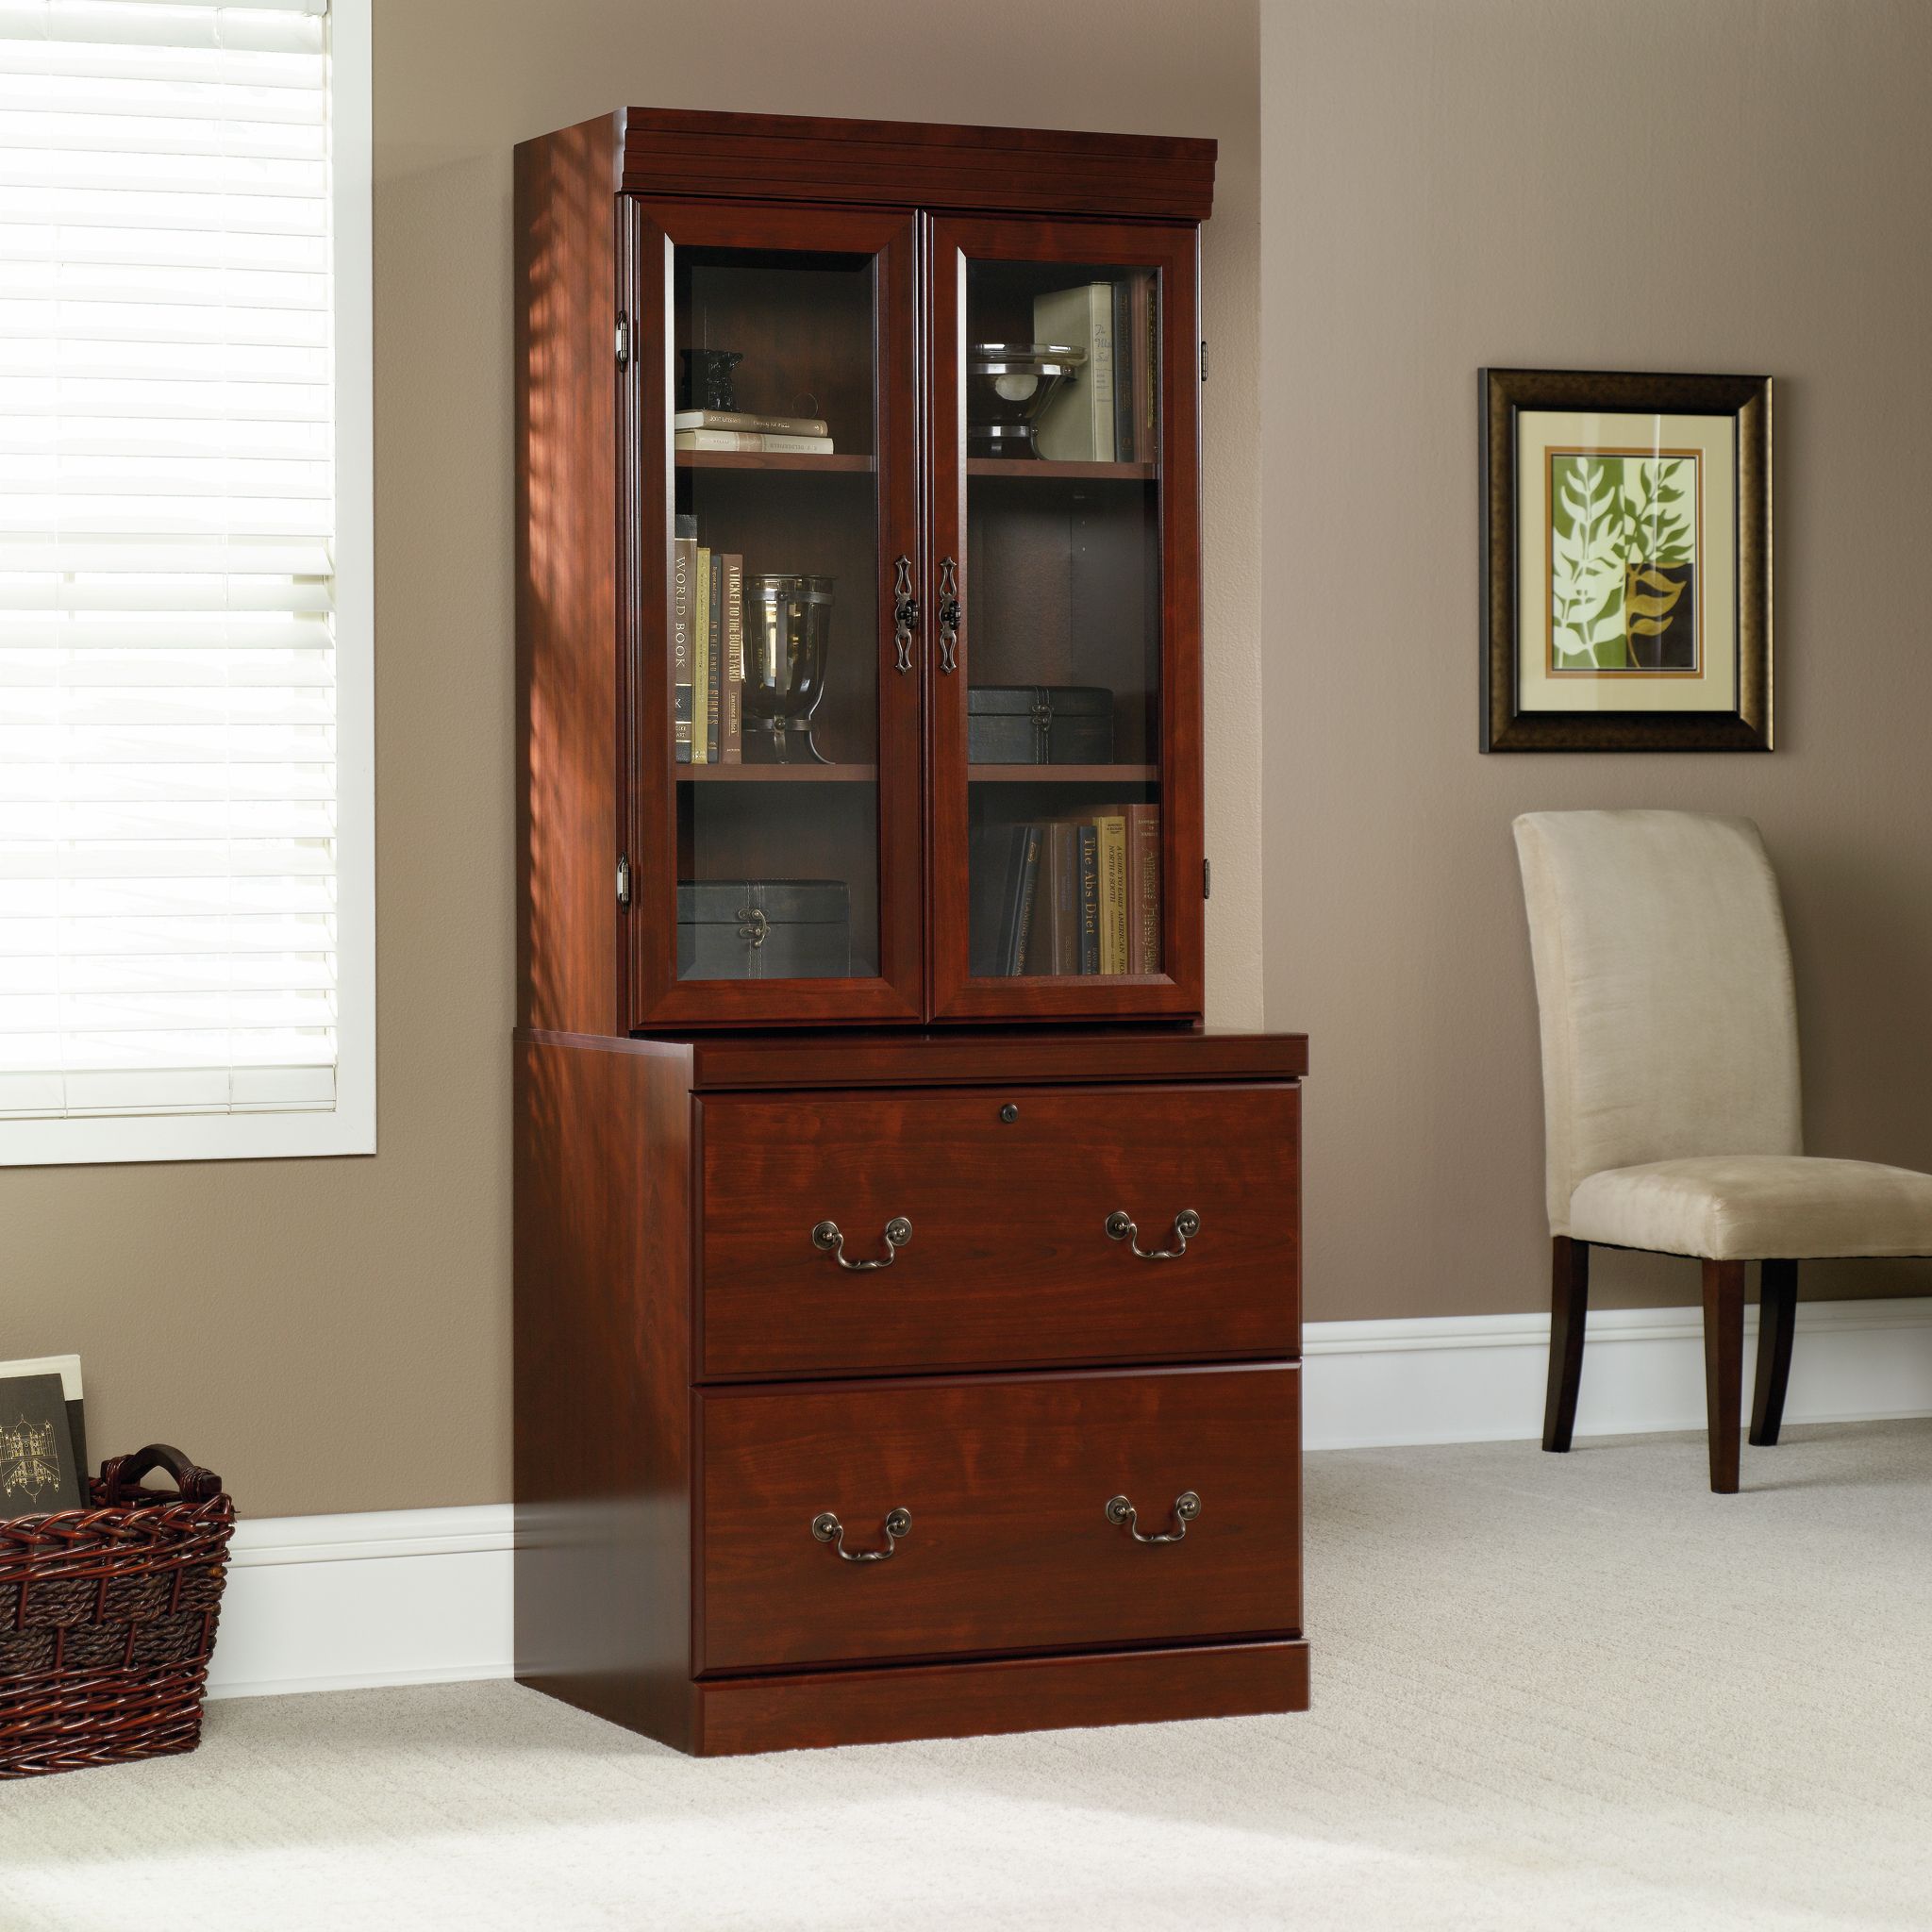 Sauder Heritage Hill Lateral File Cabinet, Classic Cherry Finish - image 2 of 5